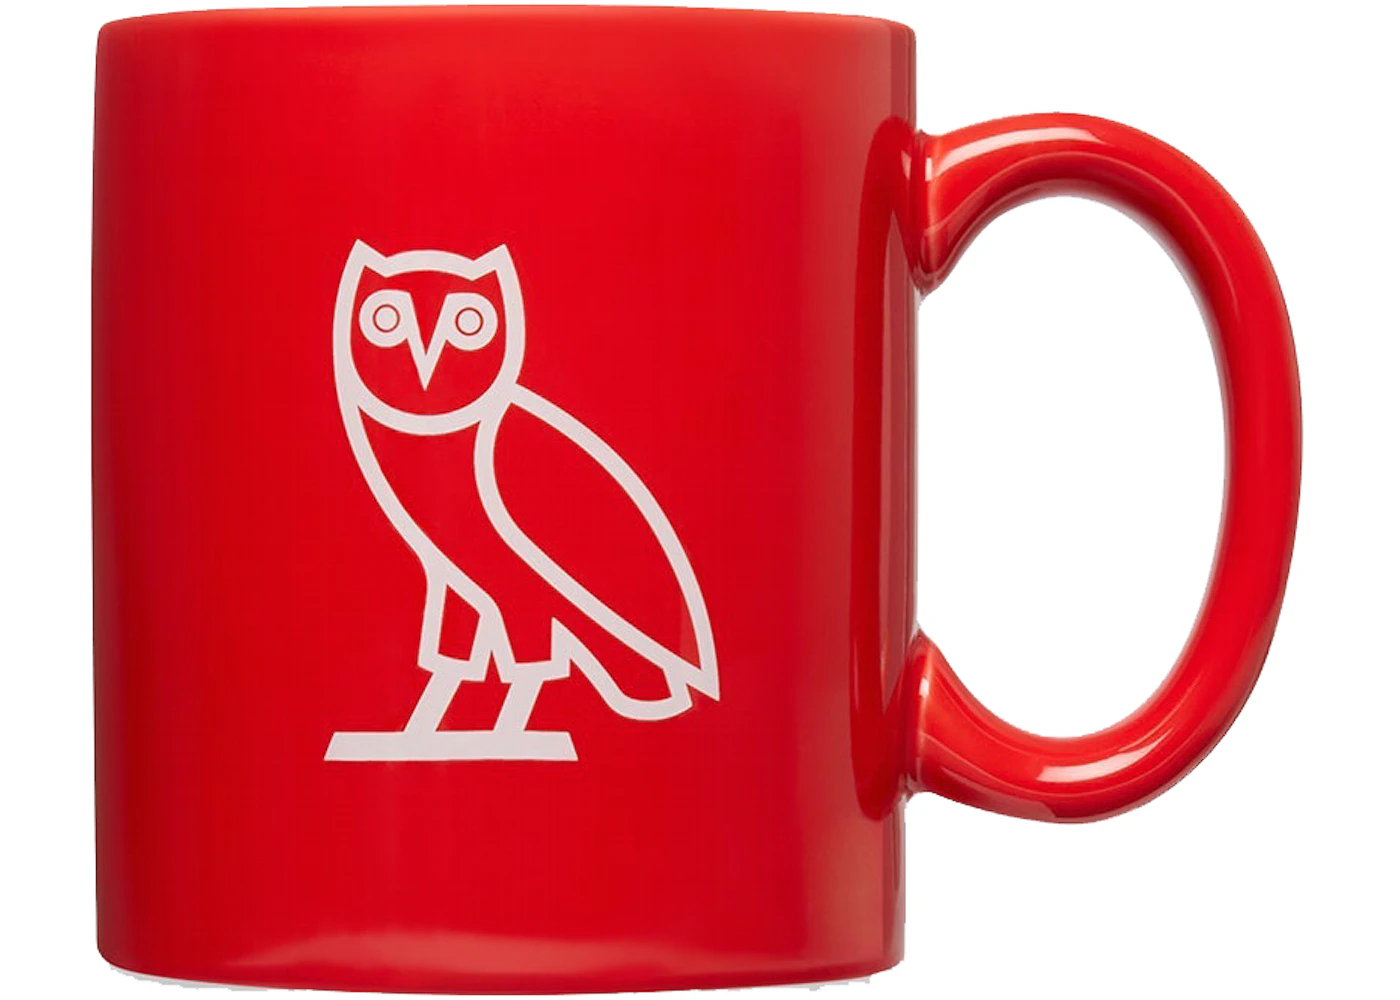 https://images.stockx.com/images/OVO-x-Disney-Classic-Mickey-Mug-Red-2.jpg?fit=fill&bg=FFFFFF&w=700&h=500&fm=webp&auto=compress&q=90&dpr=2&trim=color&updated_at=1646087658?height=78&width=78